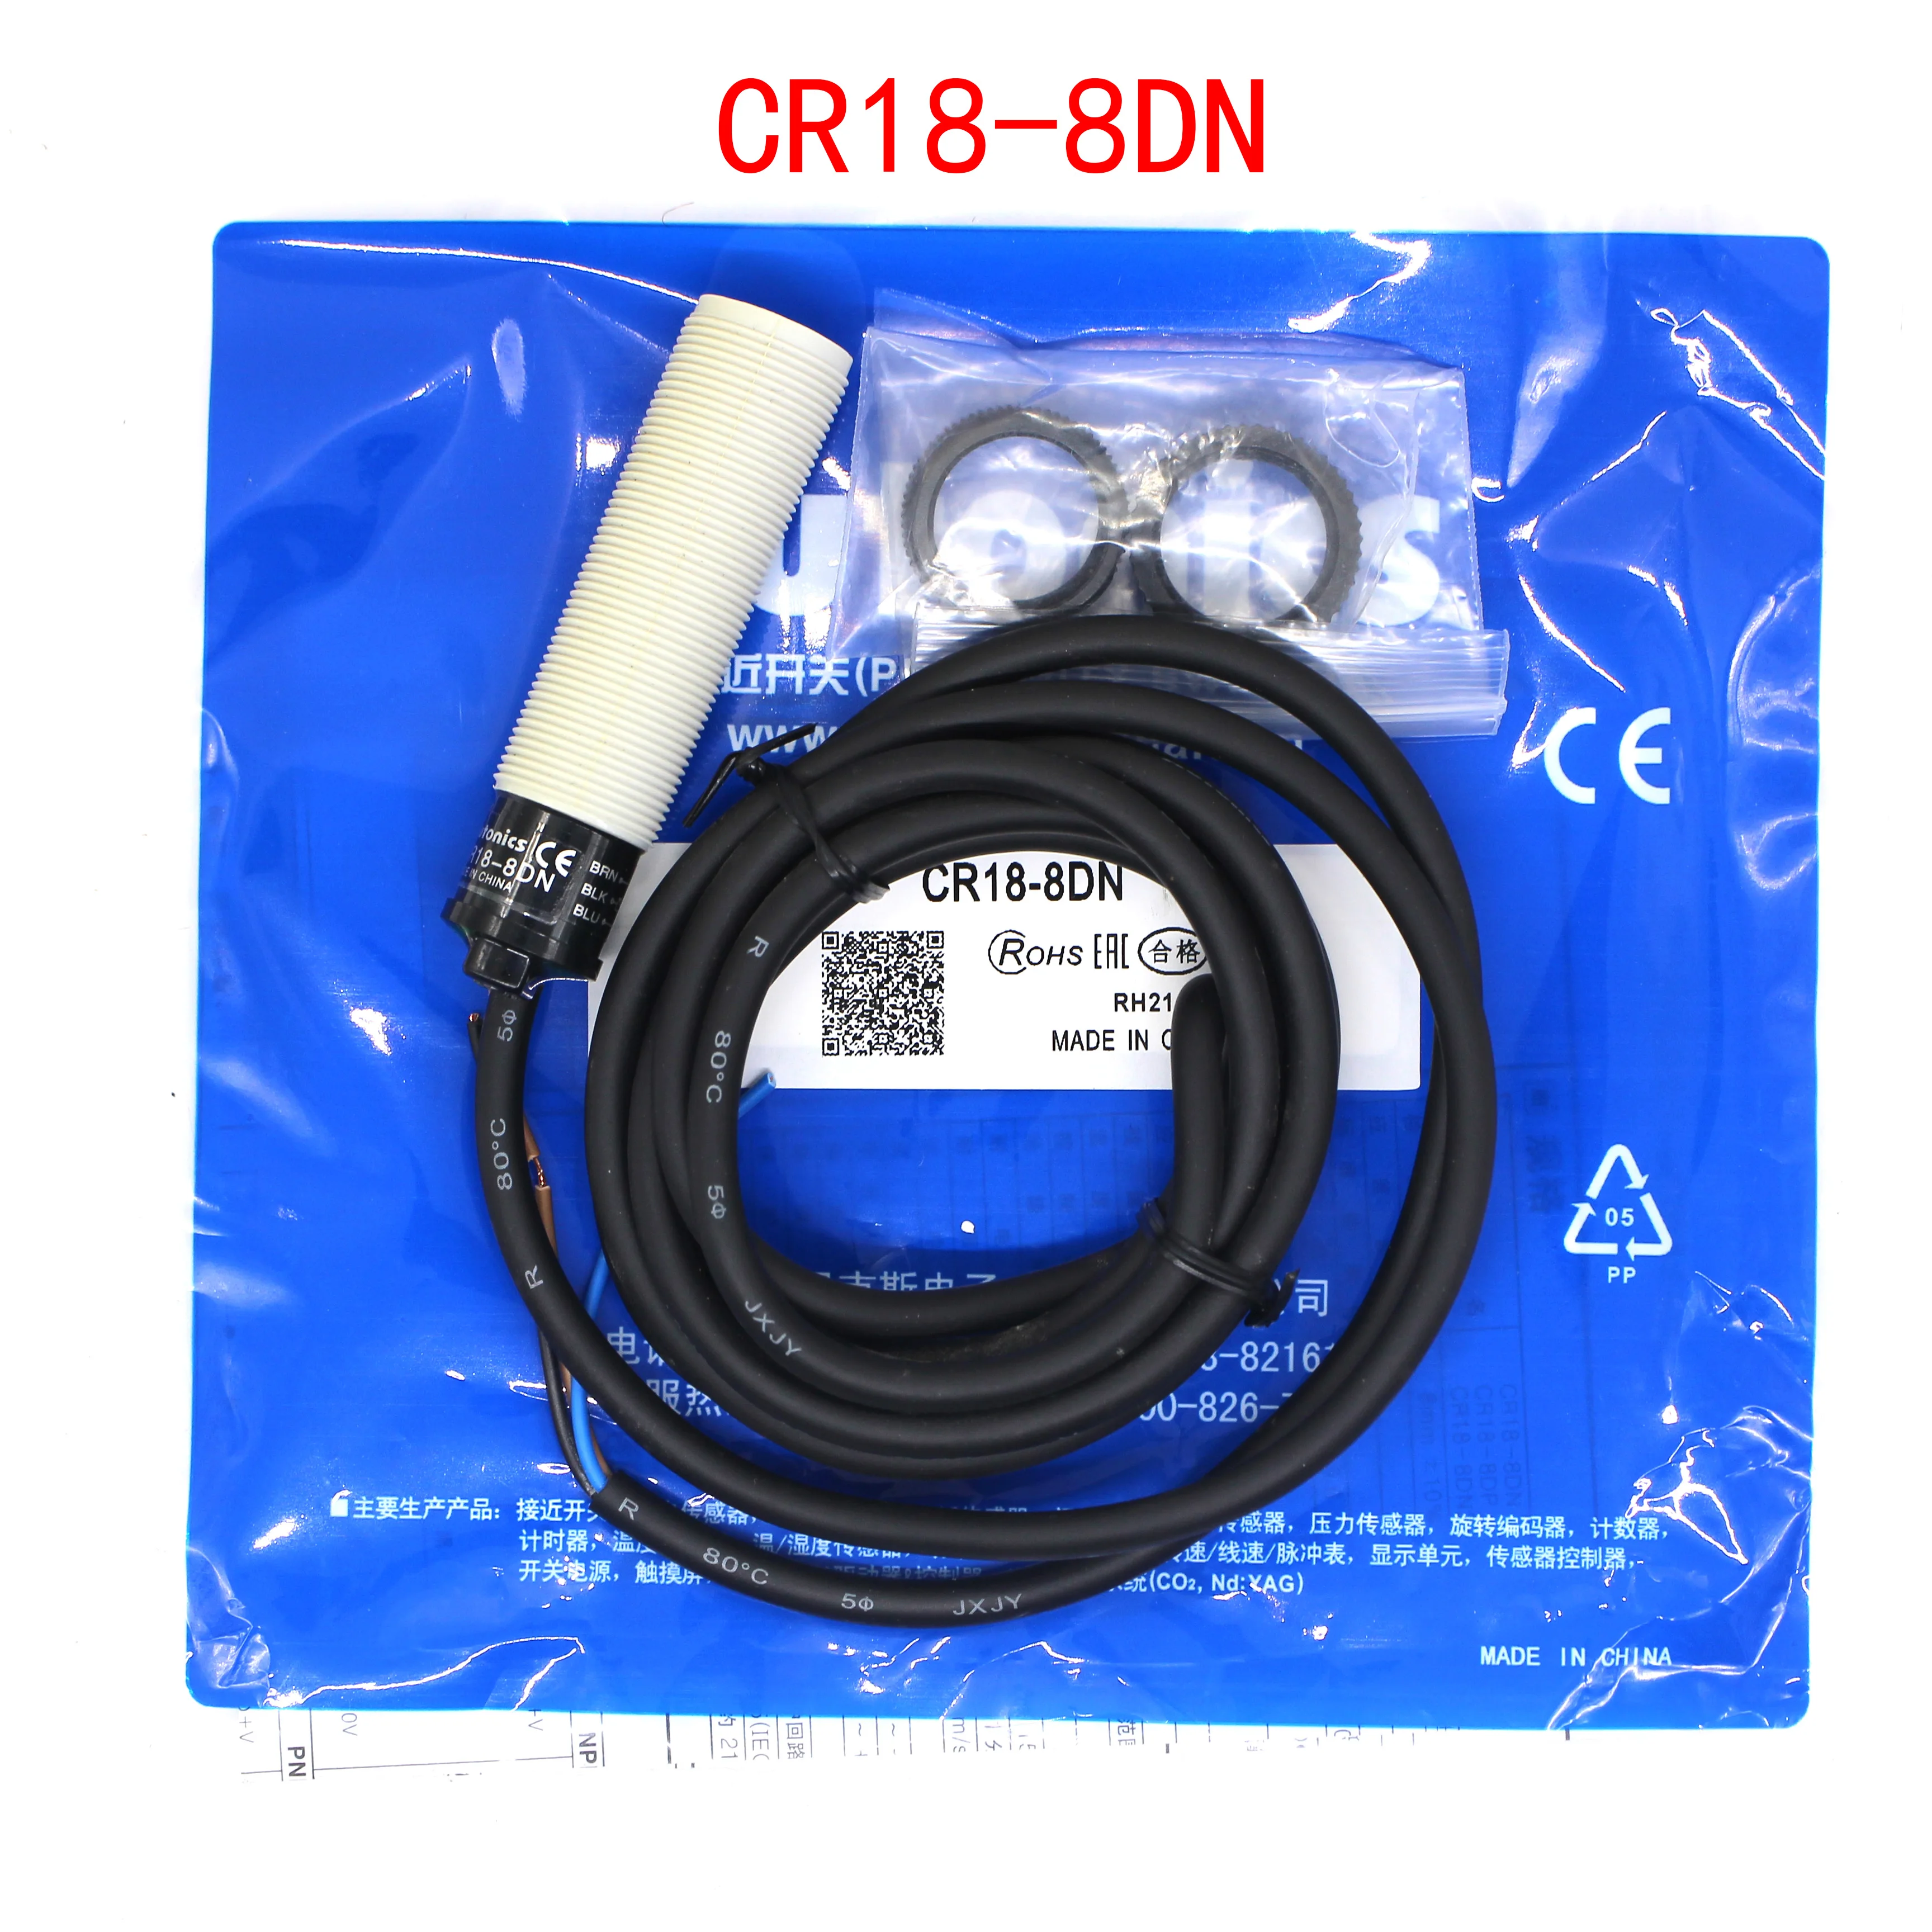 

CR18-8DN CR18-8DP CR18-8DN2 CR18-8DP2 M18 Capacitive Proximity Switch Sensor New High Quality Warranty For One Year